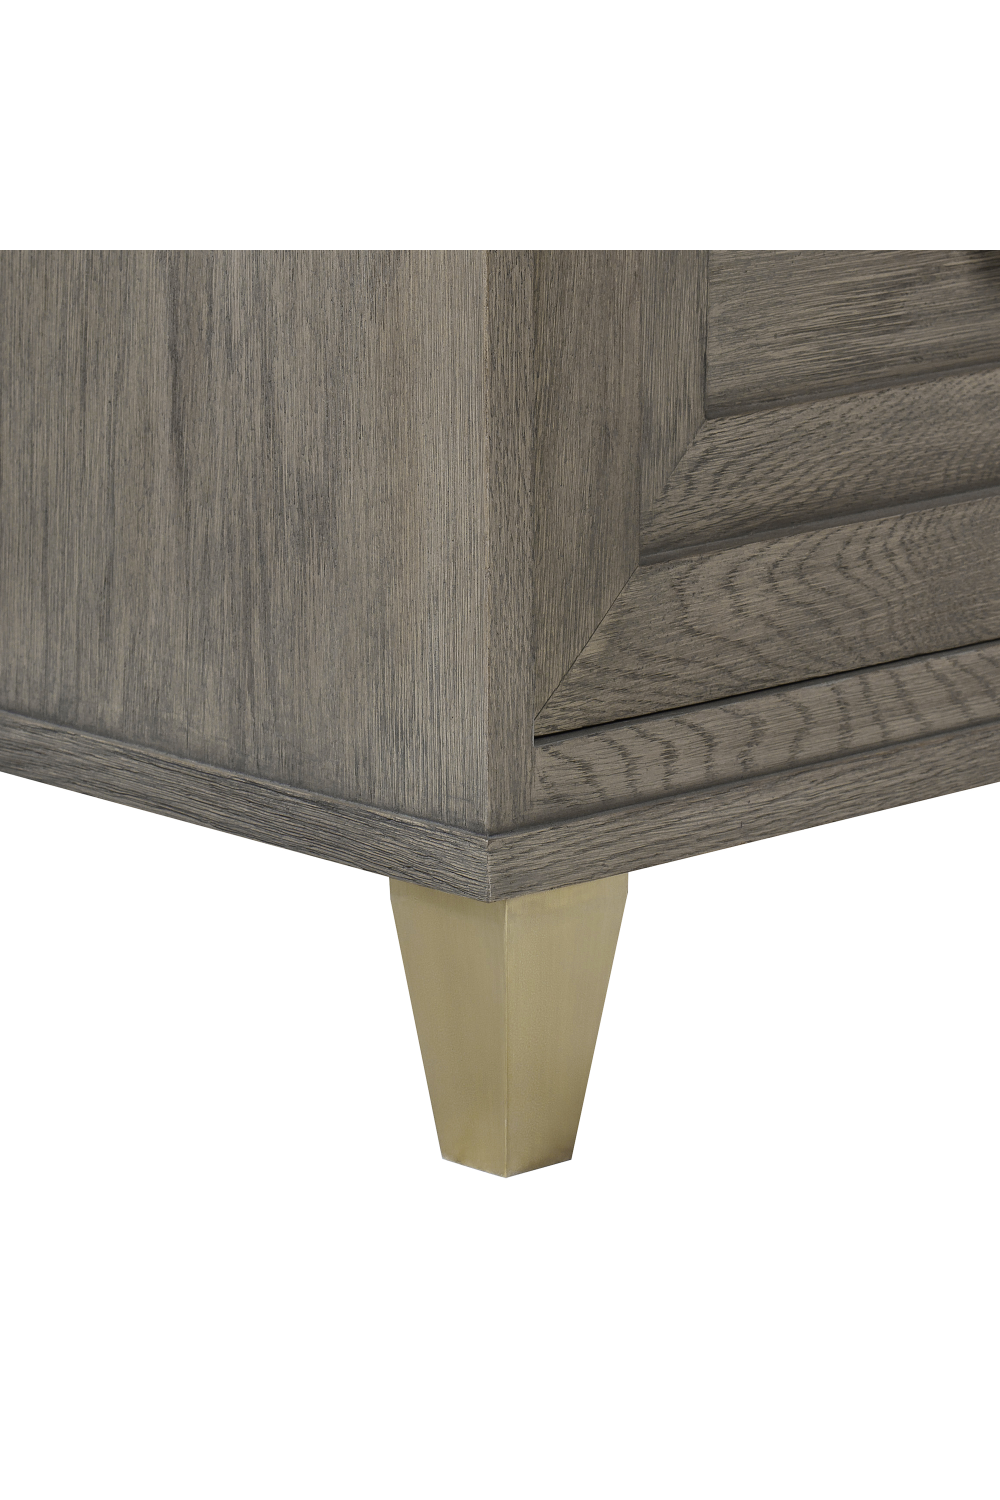 Taupe Oak Two Drawer Nightstand | Andrew Martin Claiborne | OROA